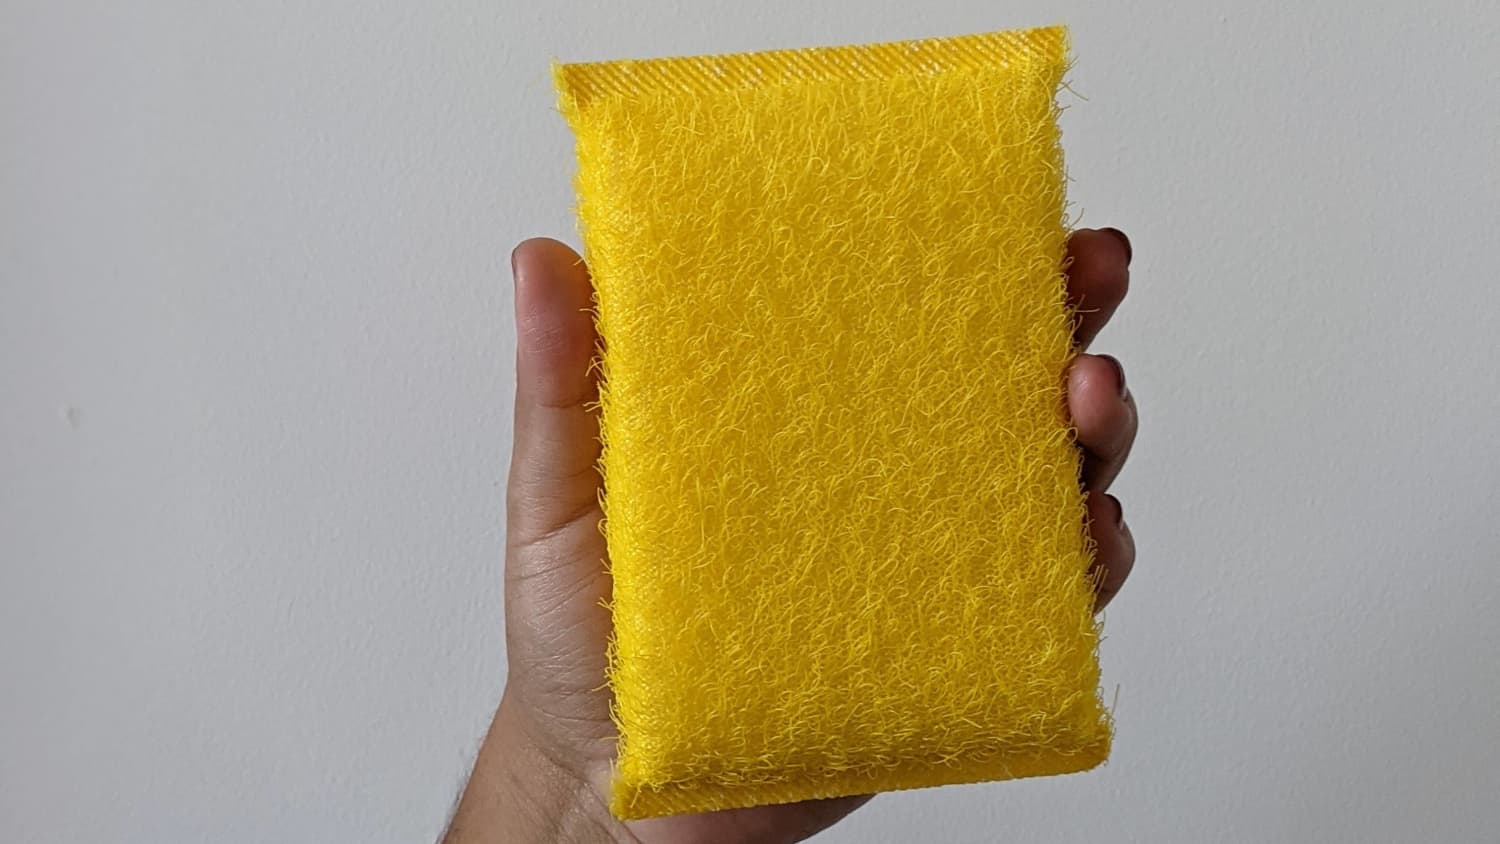 11 Cleaning Gadgets I'm Seriously Obsessed With - Sponge Hacks